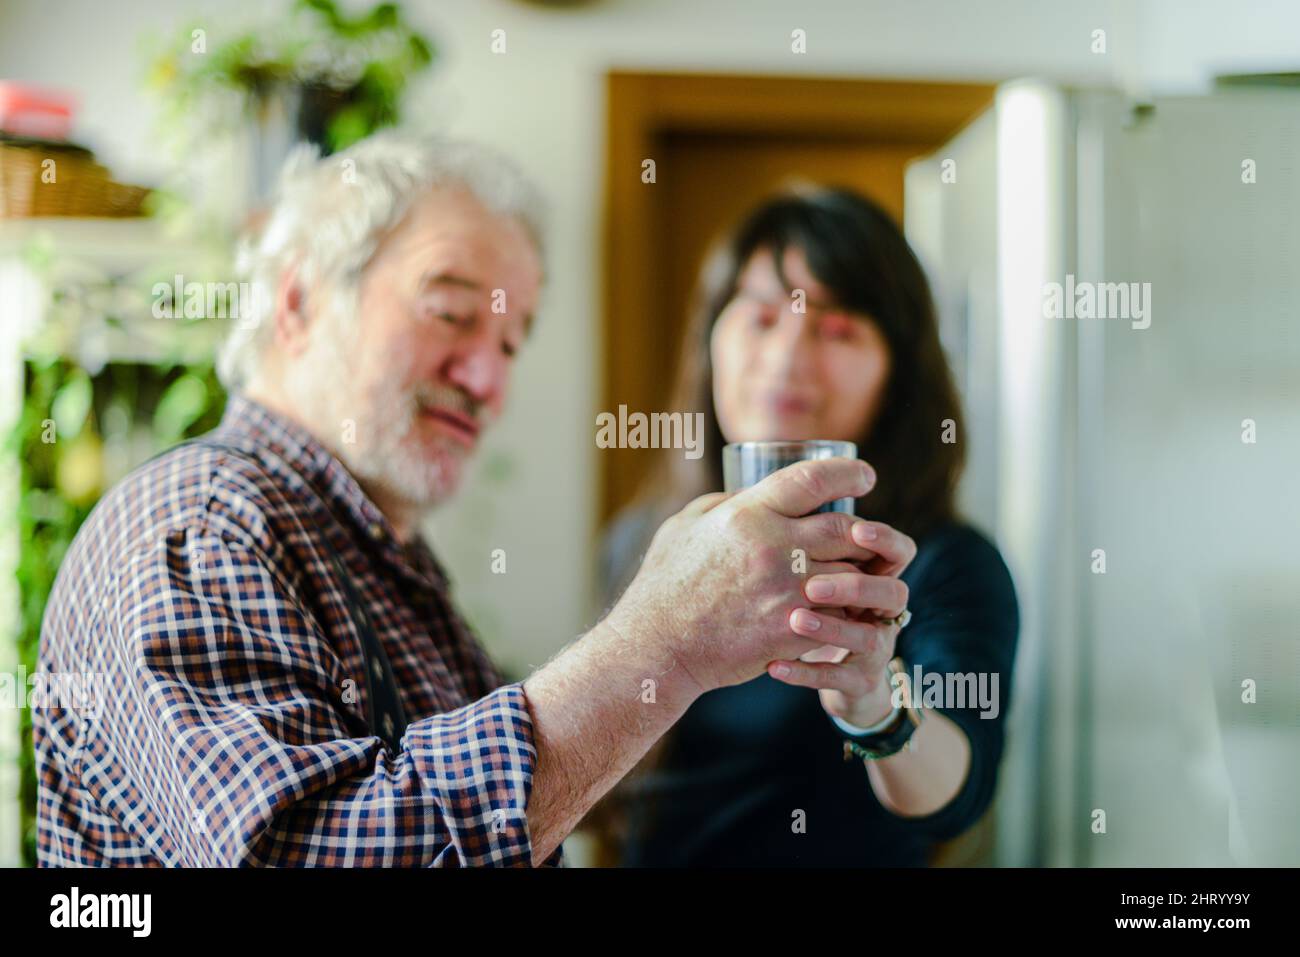 caucasian senior man drinking wine and getting drunk at home stressing younger hispanic wife - alcoholism and domestic violence concept Stock Photo